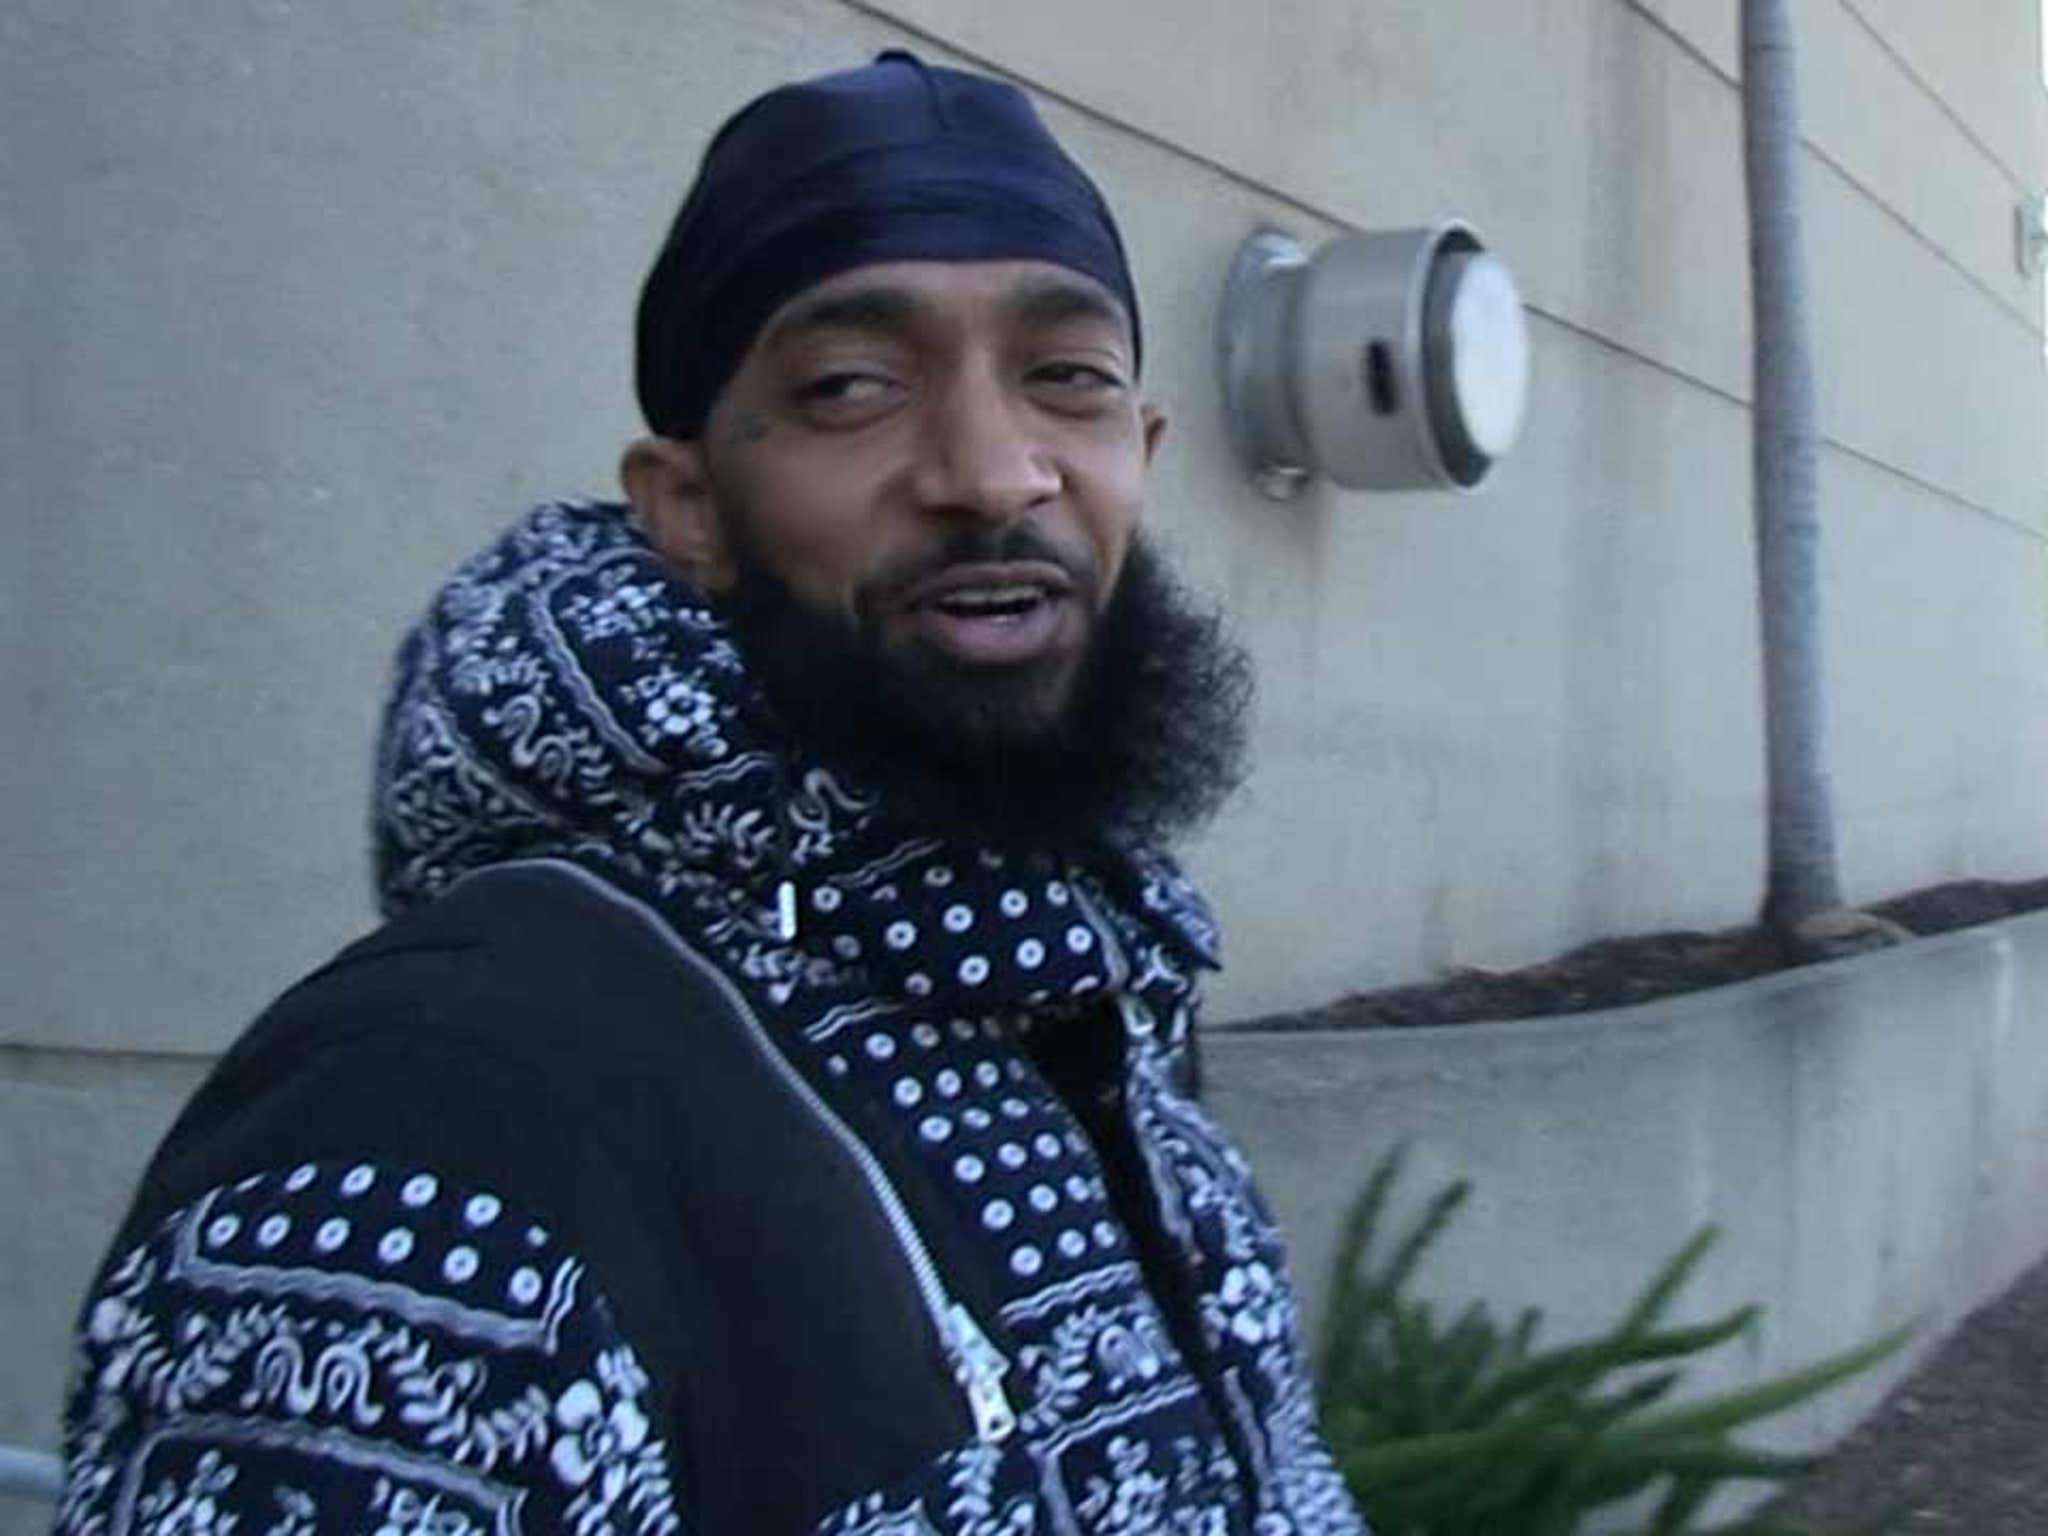 Nipsey Hussle Warns Cavs Fans, Better Not 'Boo' LeBron in Cleveland Return!